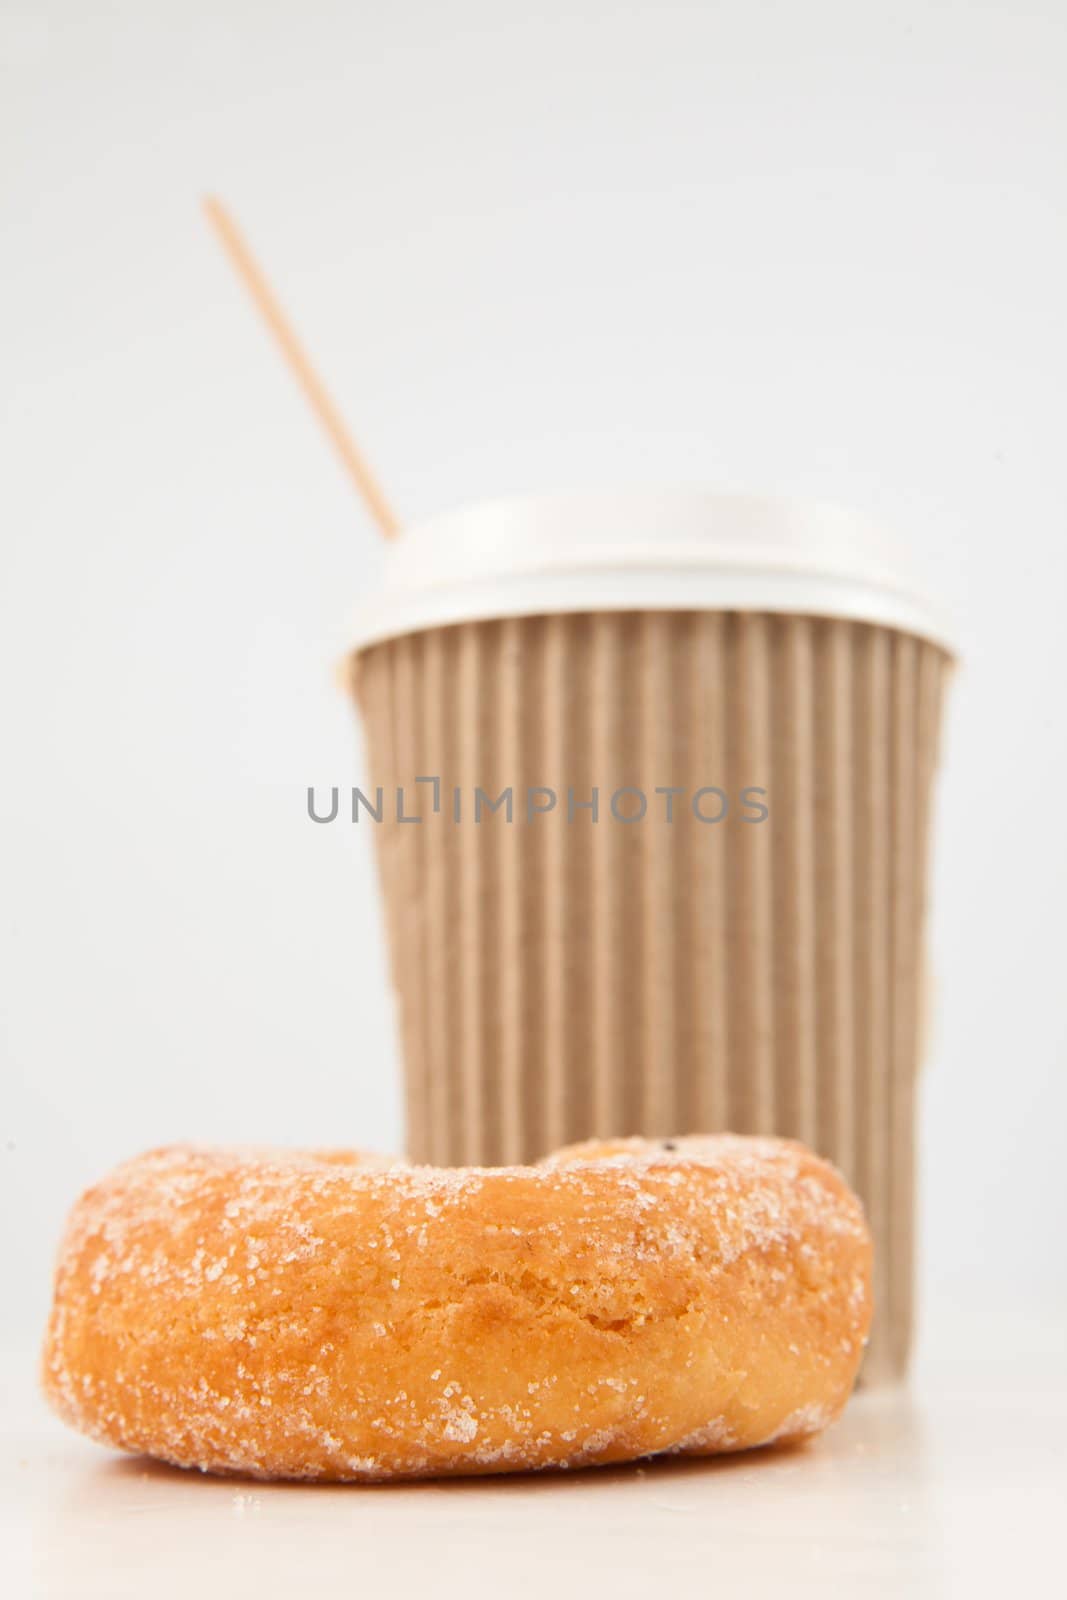 A doughnut and a cup of coffee placed side by side against a white background